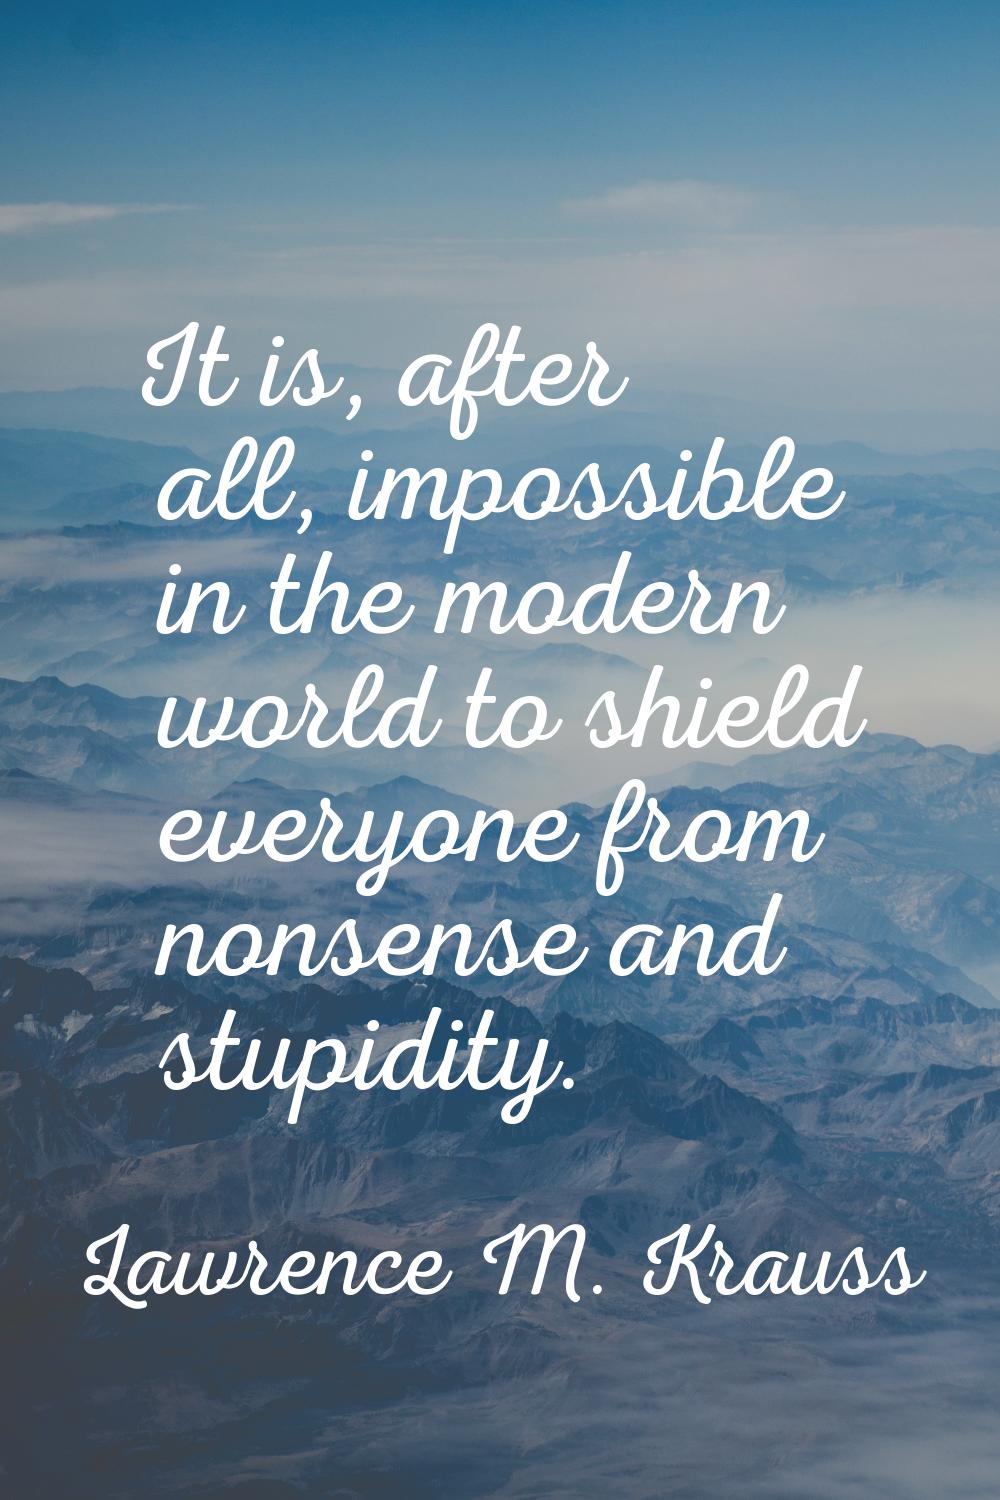 It is, after all, impossible in the modern world to shield everyone from nonsense and stupidity.